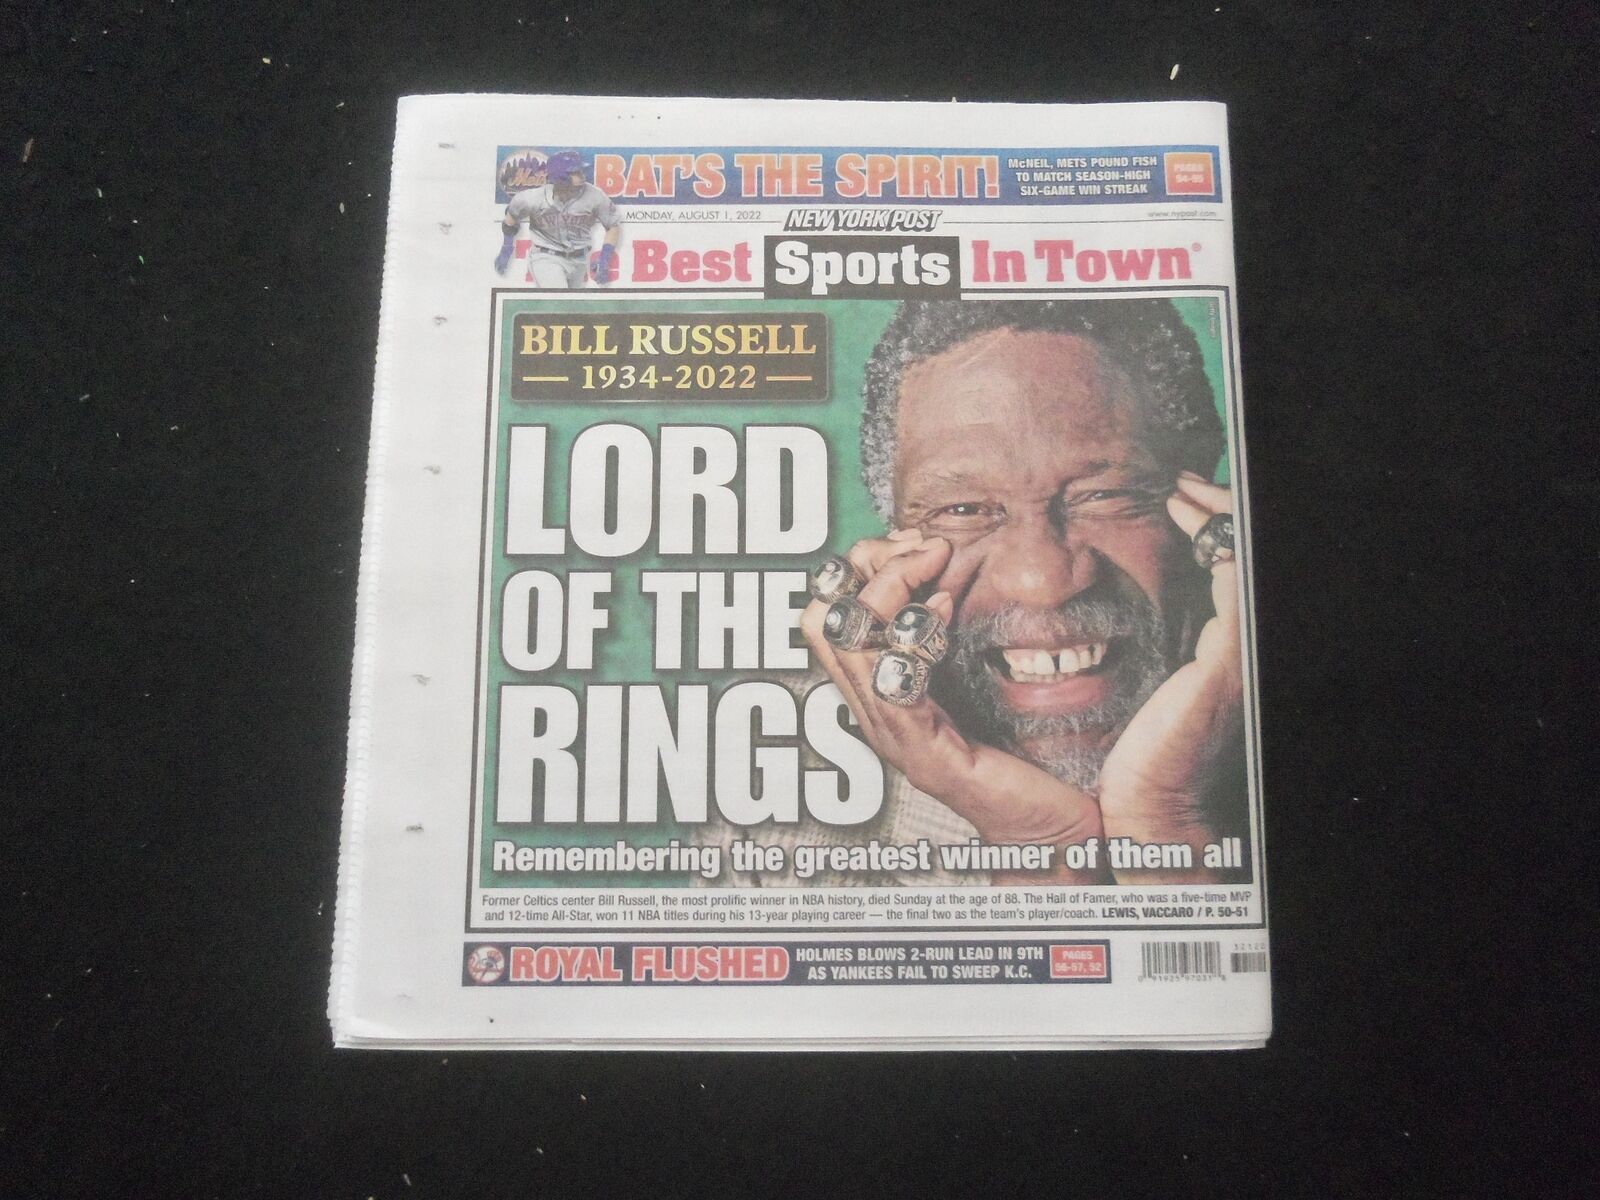 2022 AUGUST 1 NEW YORK POST NEWSPAPER - BILL RUSSELL DIED (1934-2022)